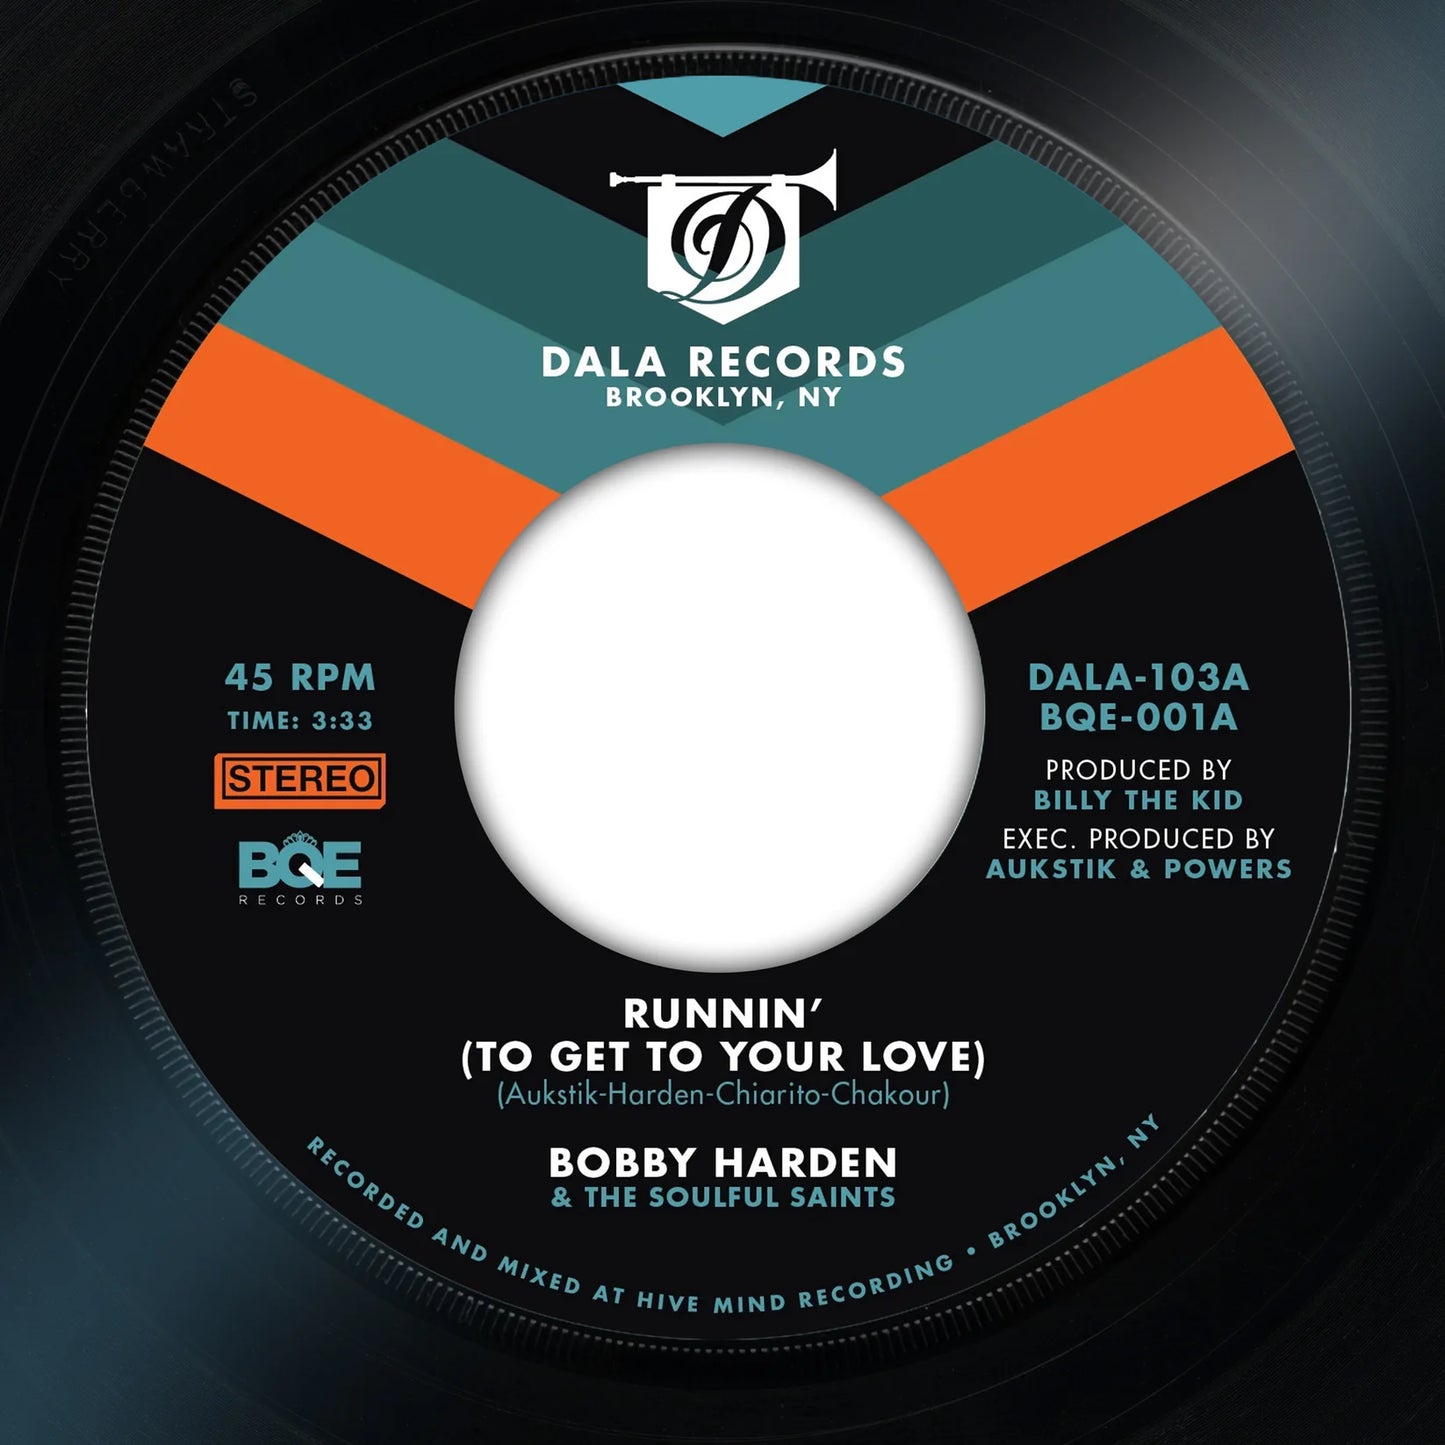 Bobby Harden & The Soulful Saints "Runnin' (To Get To Your Love)"